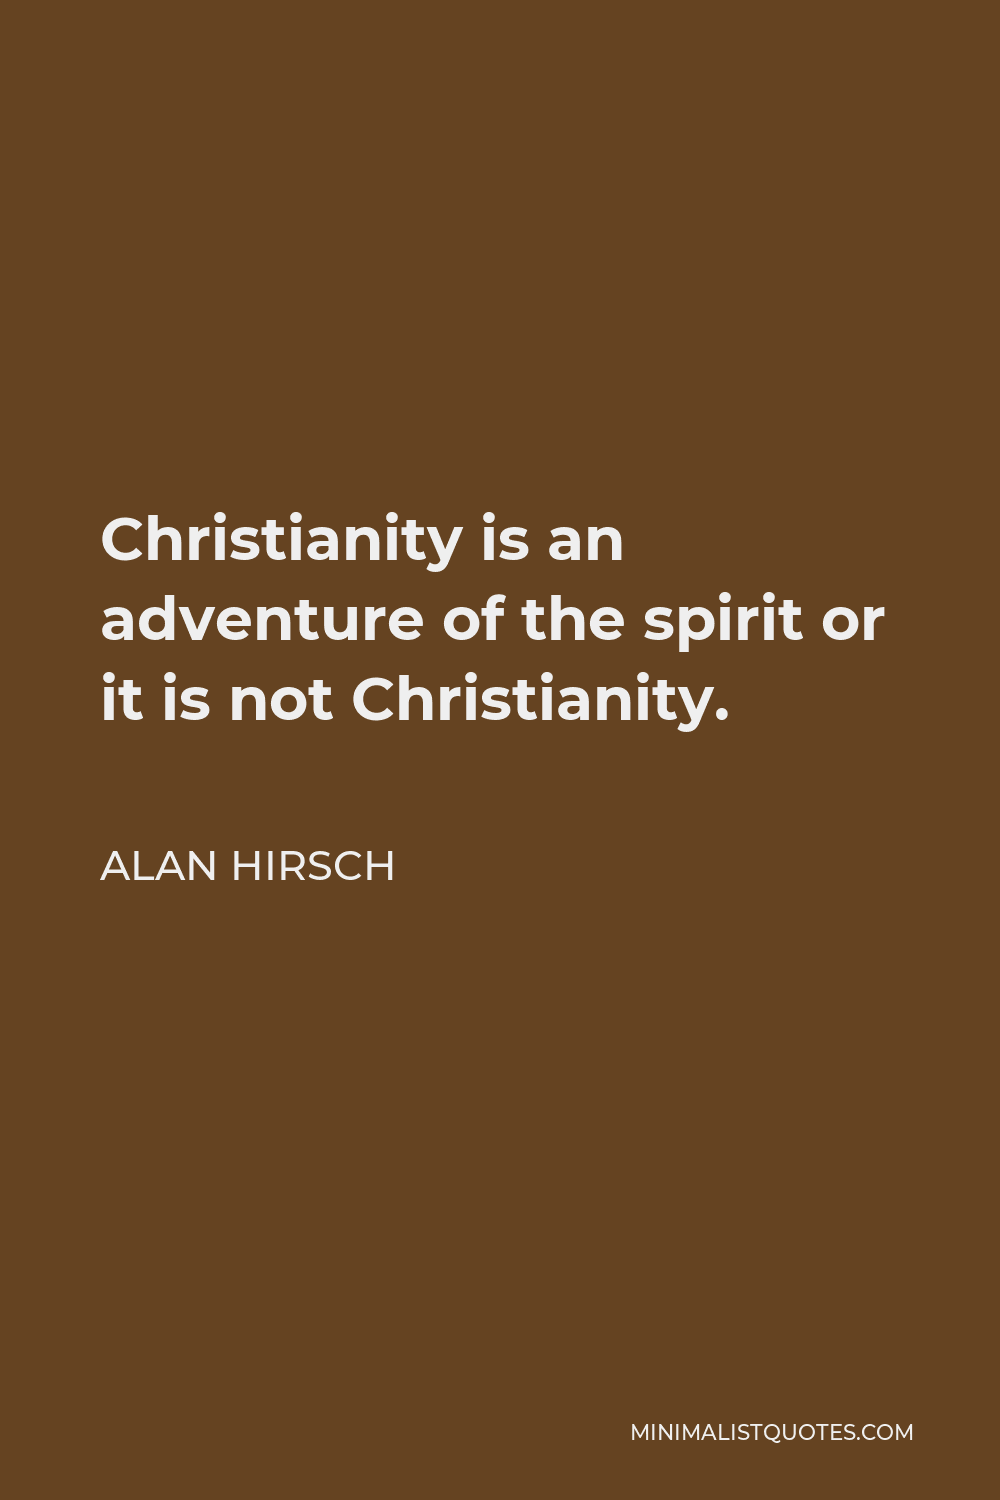 Alan Hirsch Quote - Christianity is an adventure of the spirit or it is not Christianity.